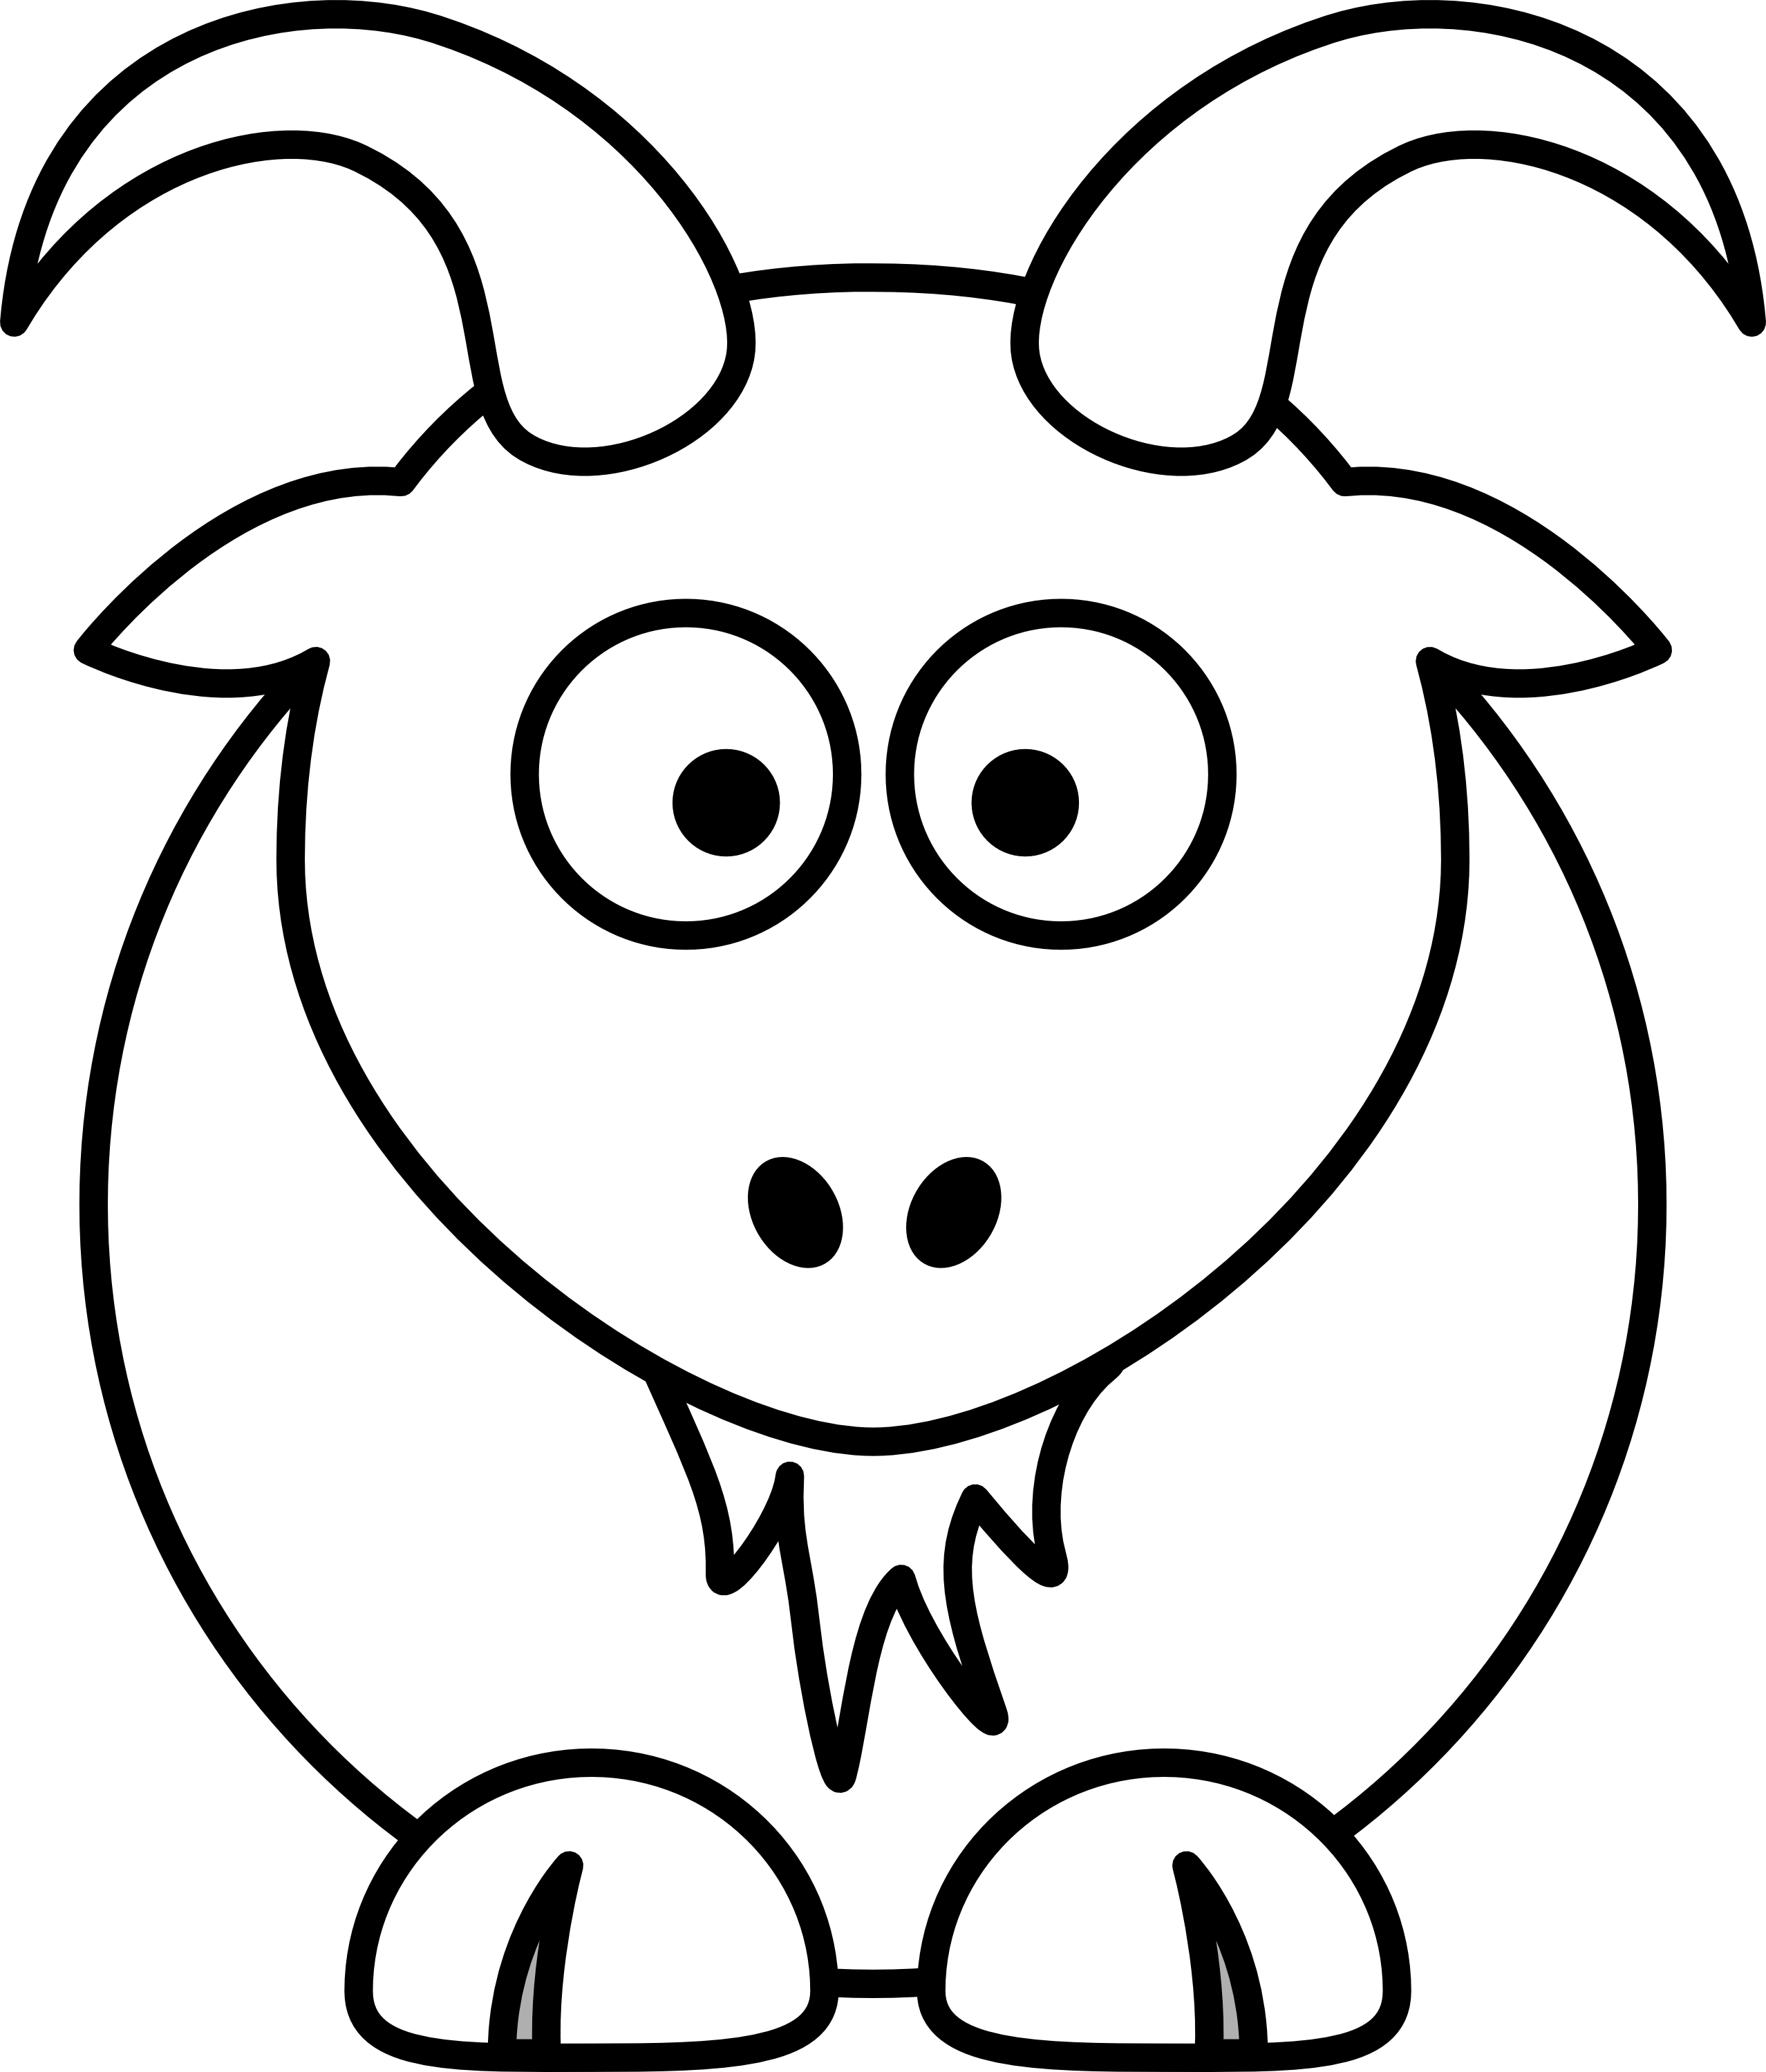 Addax antelope black and white clipart free clipart design